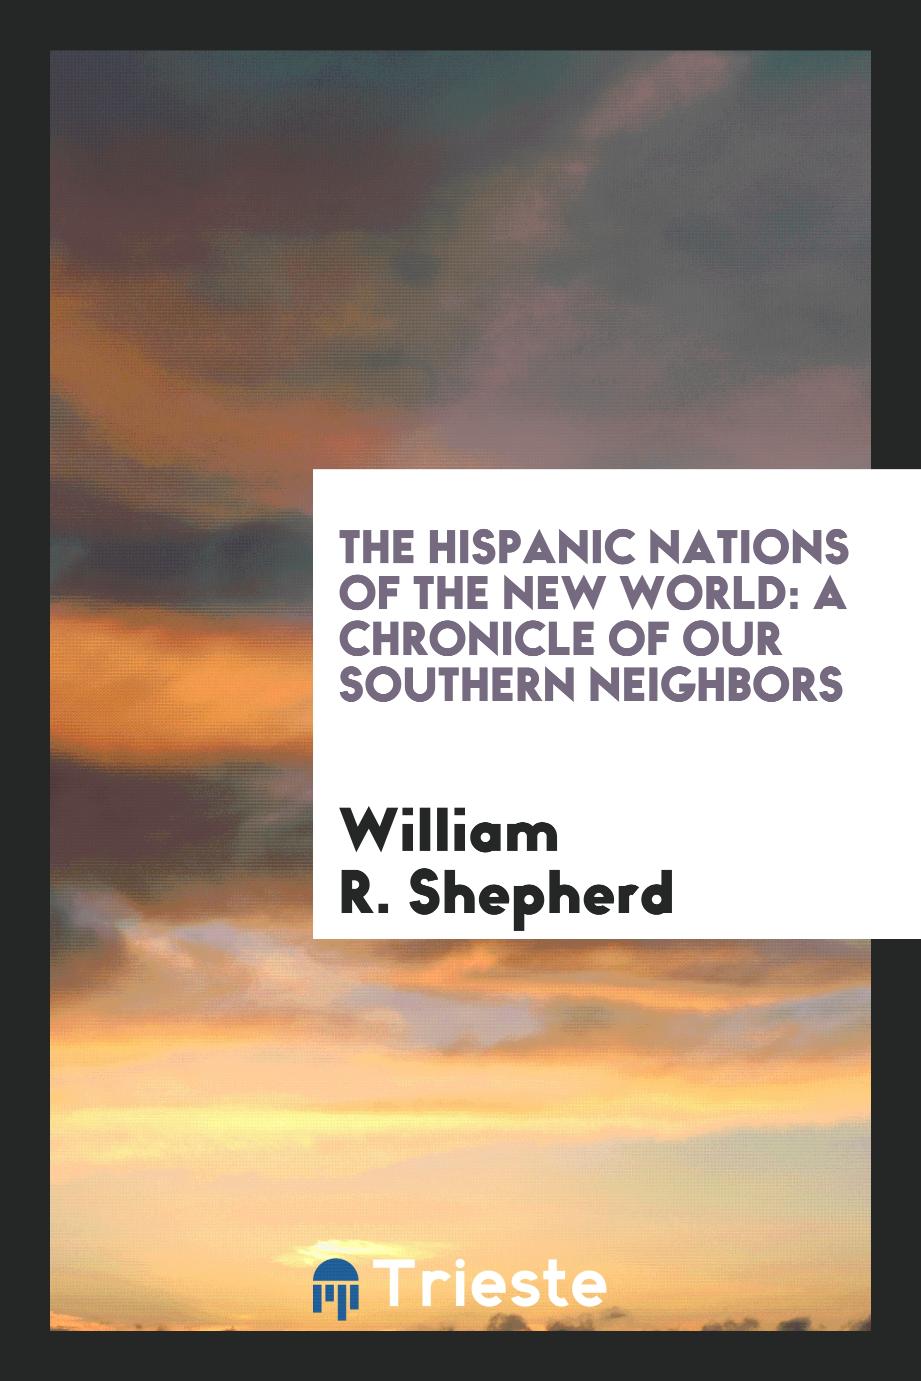 The Hispanic Nations of the New World: A Chronicle of Our Southern Neighbors